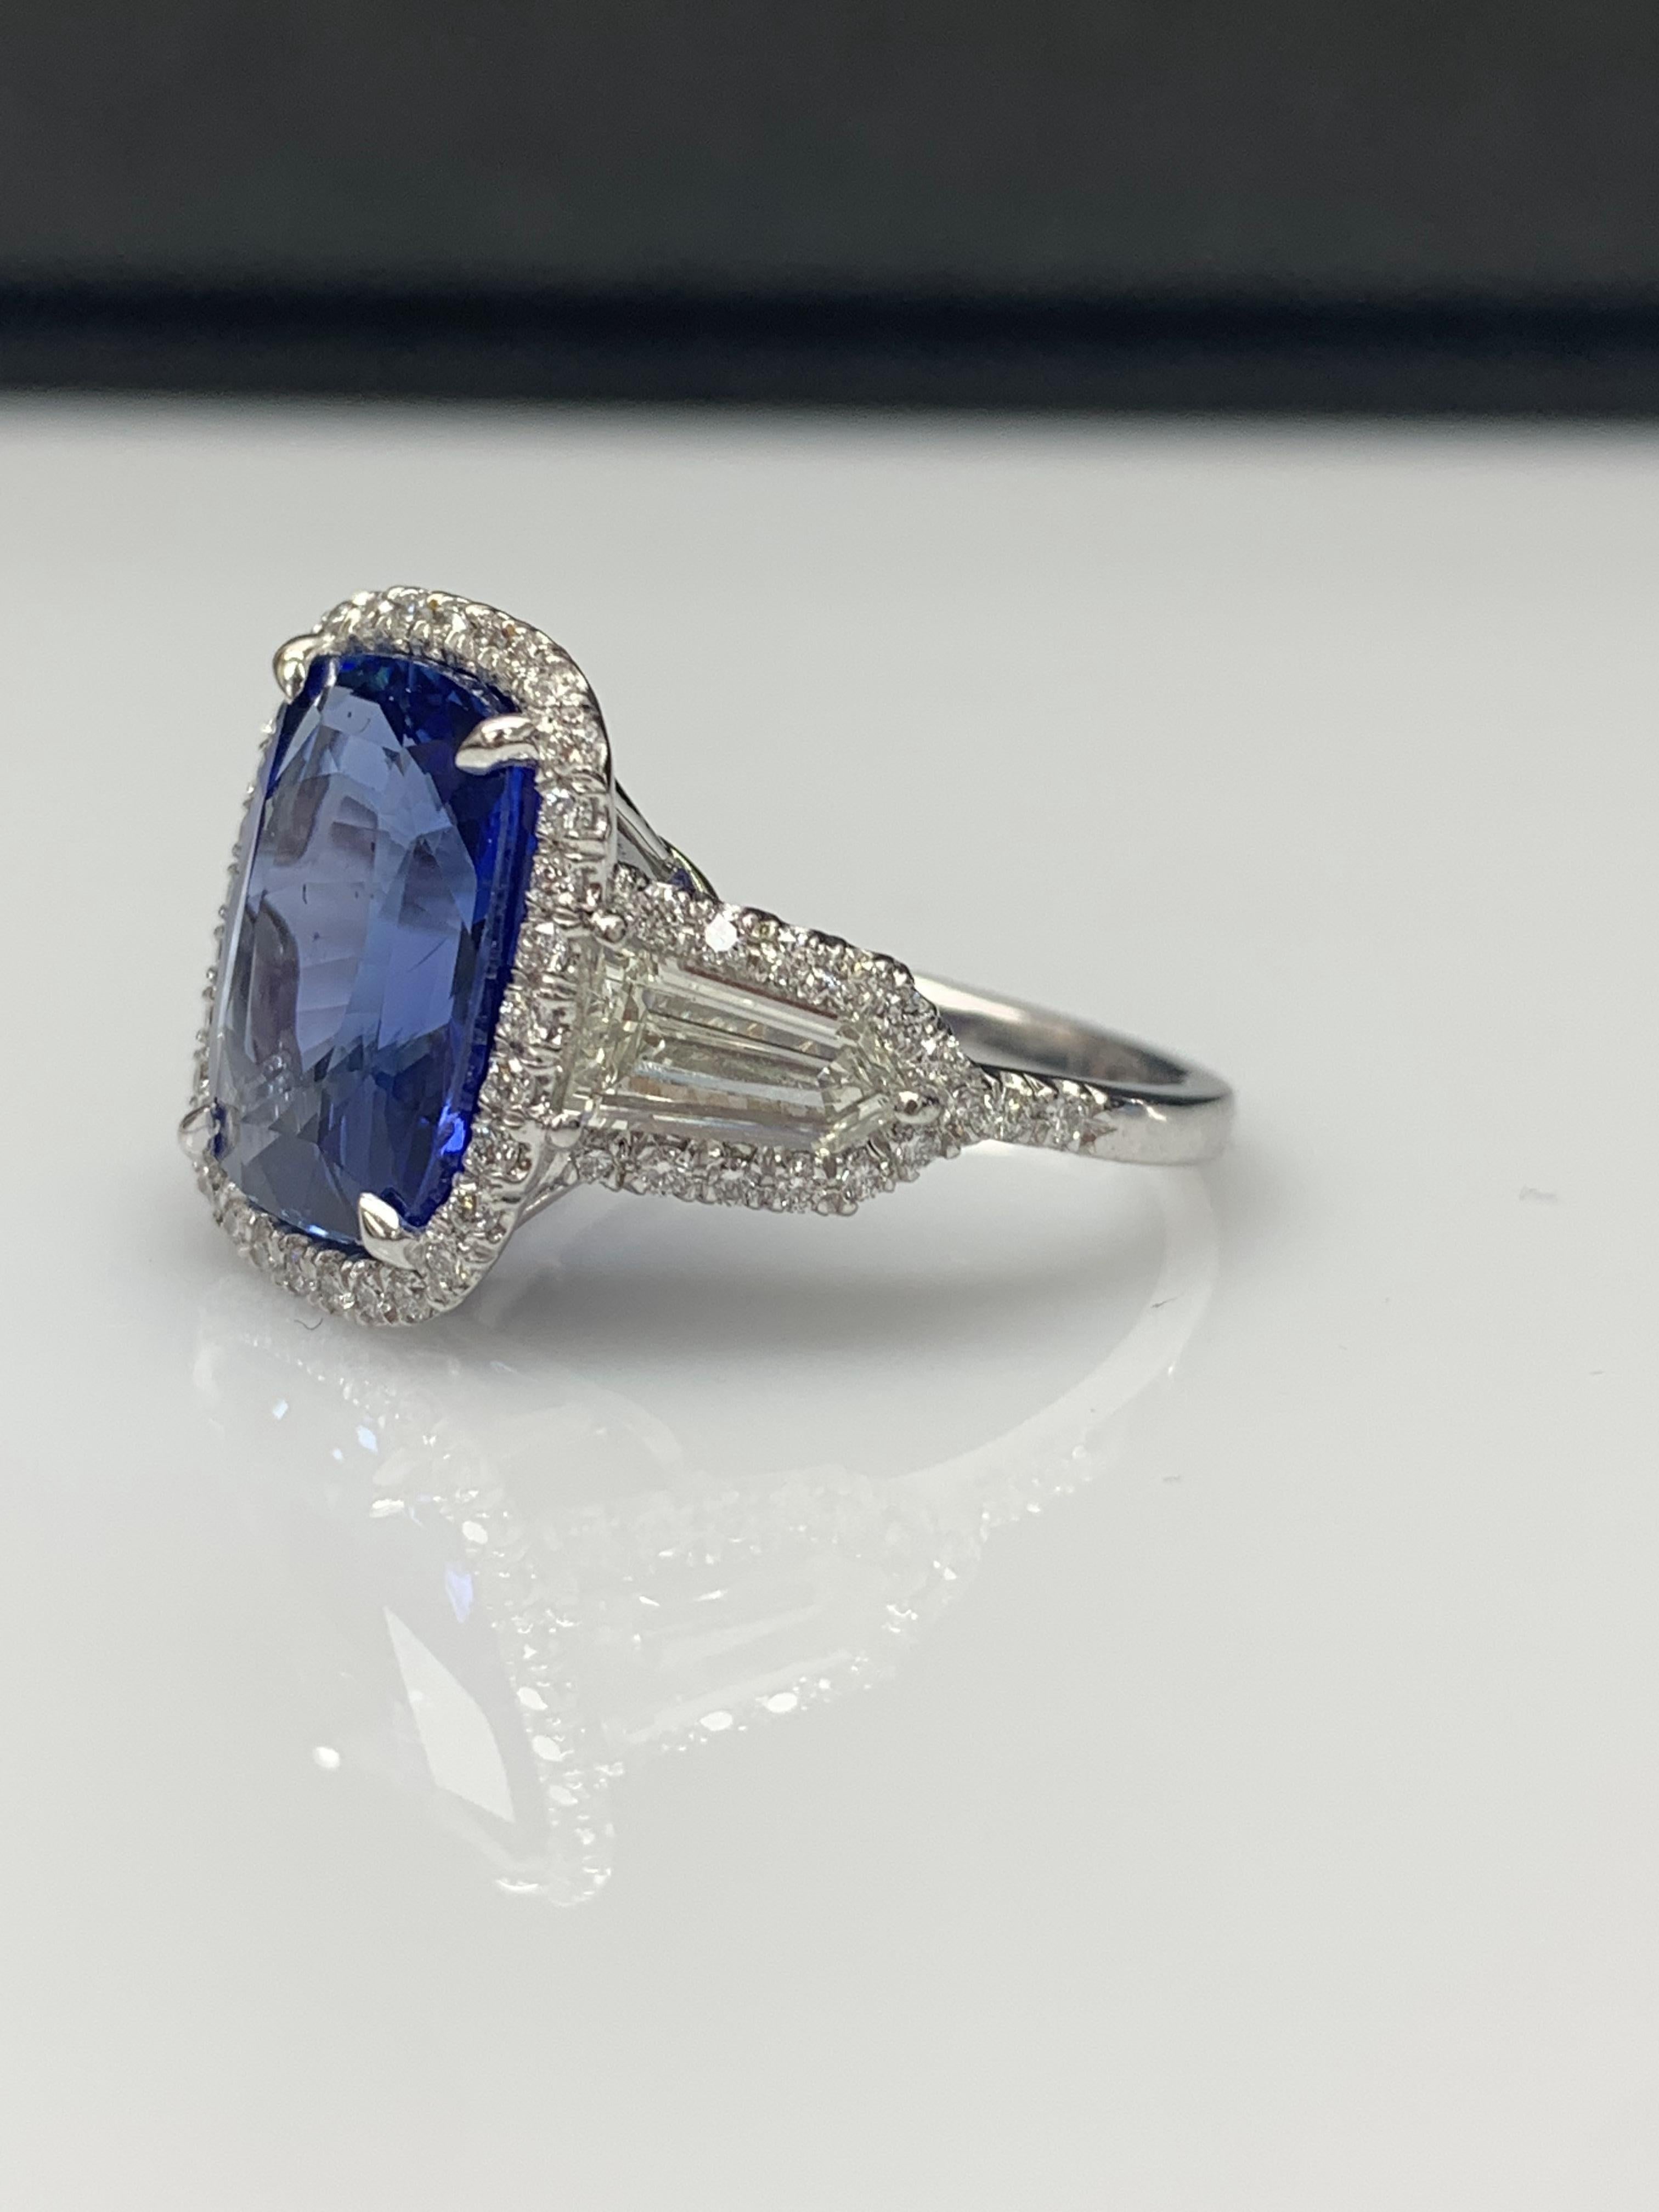 7.51 Carat Cushion Cut Sapphire and Diamond Engagement Ring in Platinum For Sale 1